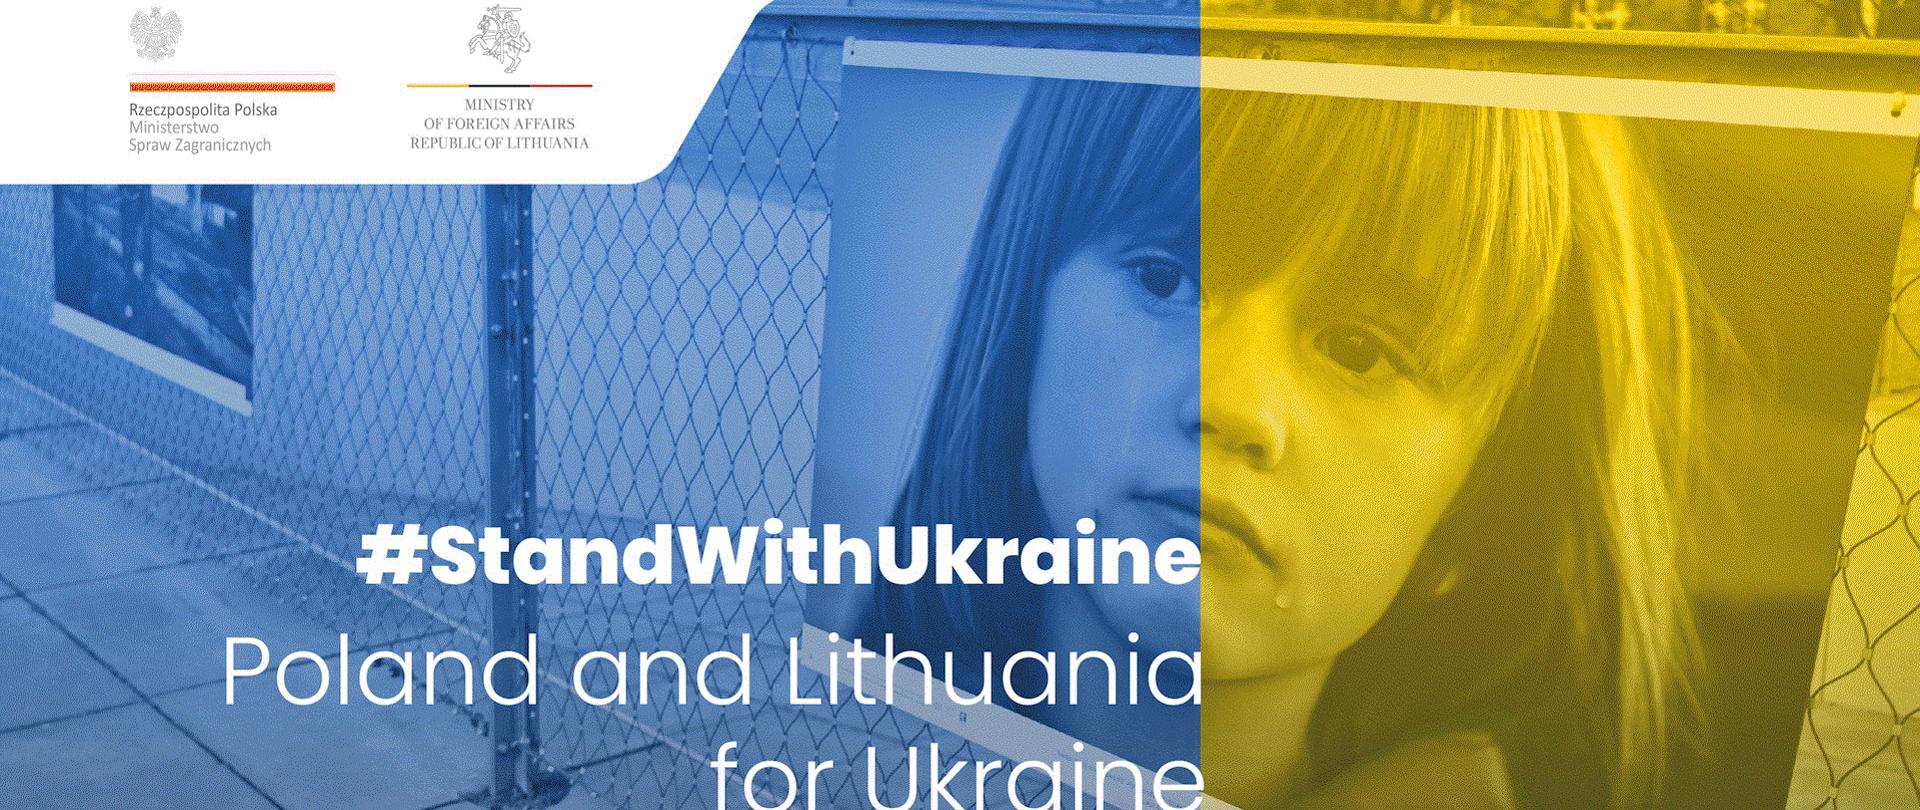 Poland and Lithuania for Ukraine - baner wystawy